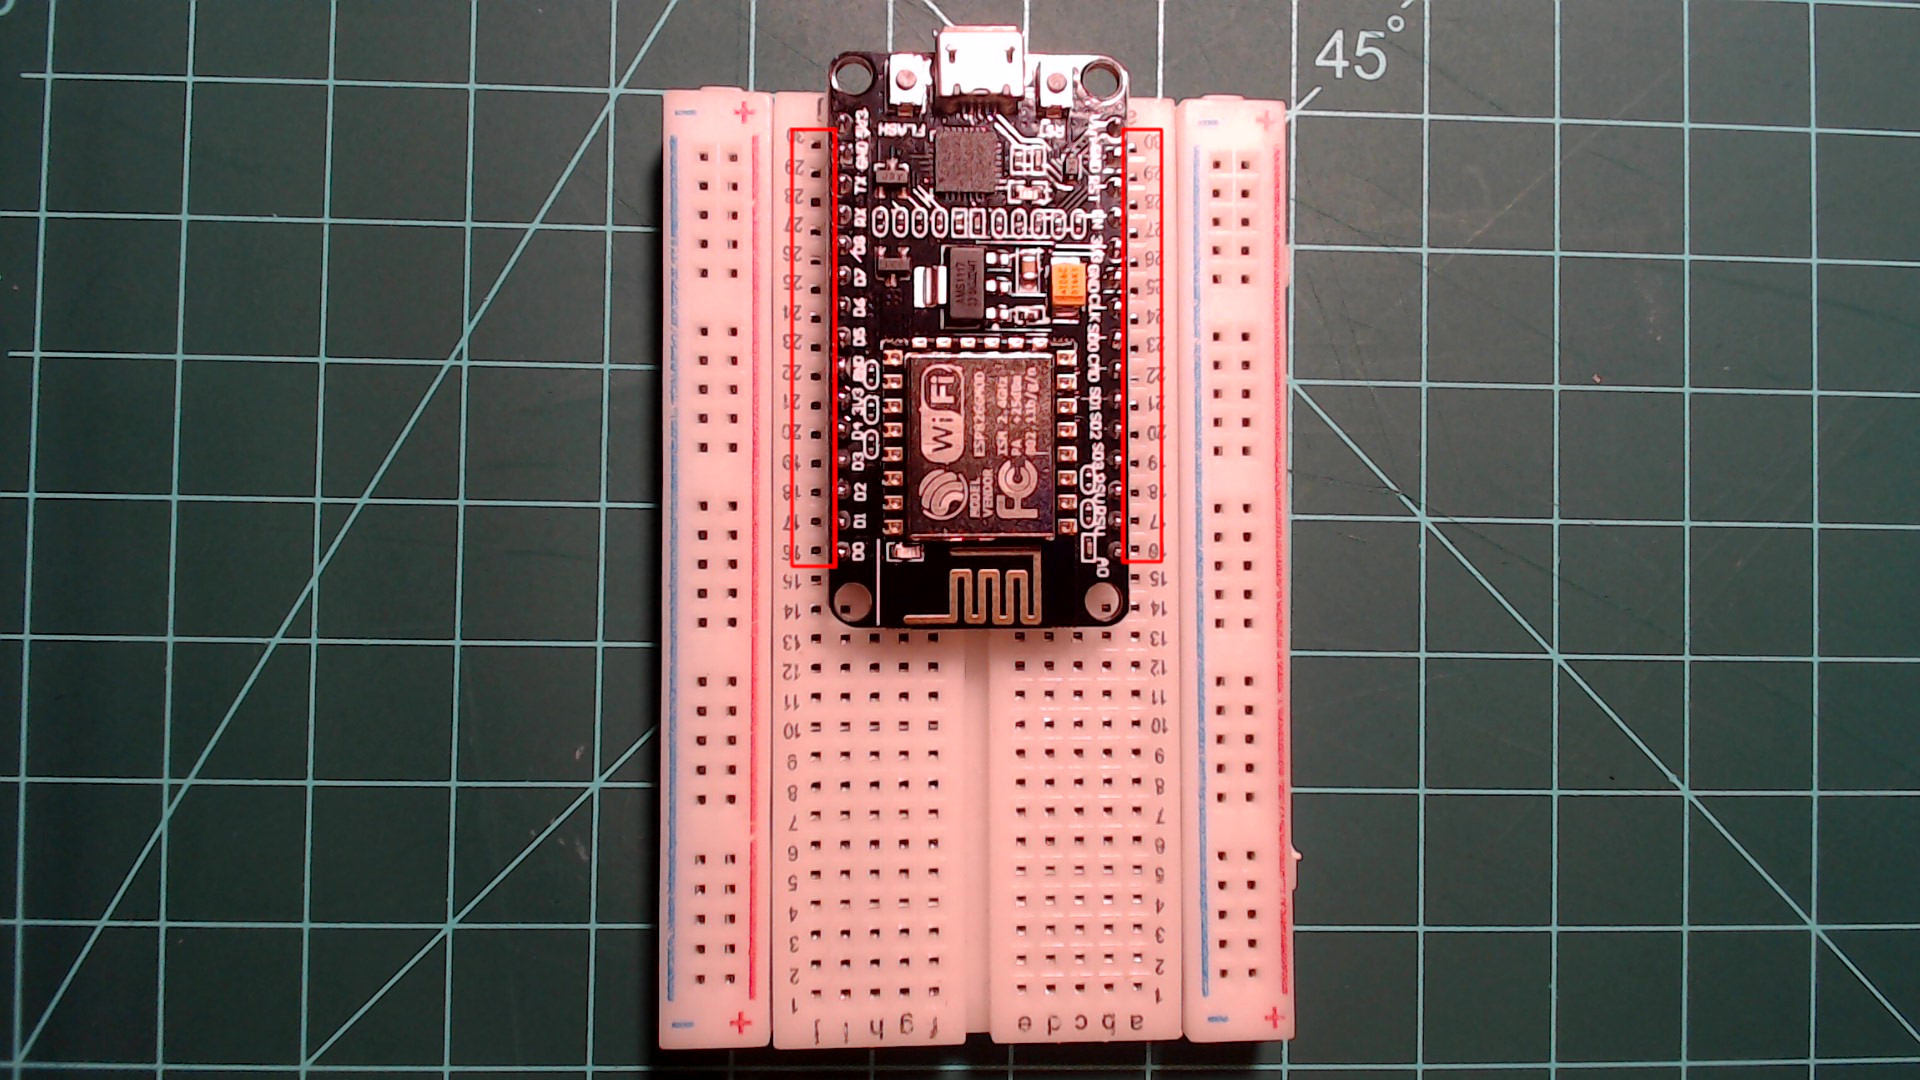 Center the NodeMCU on the breadboard as seen here.